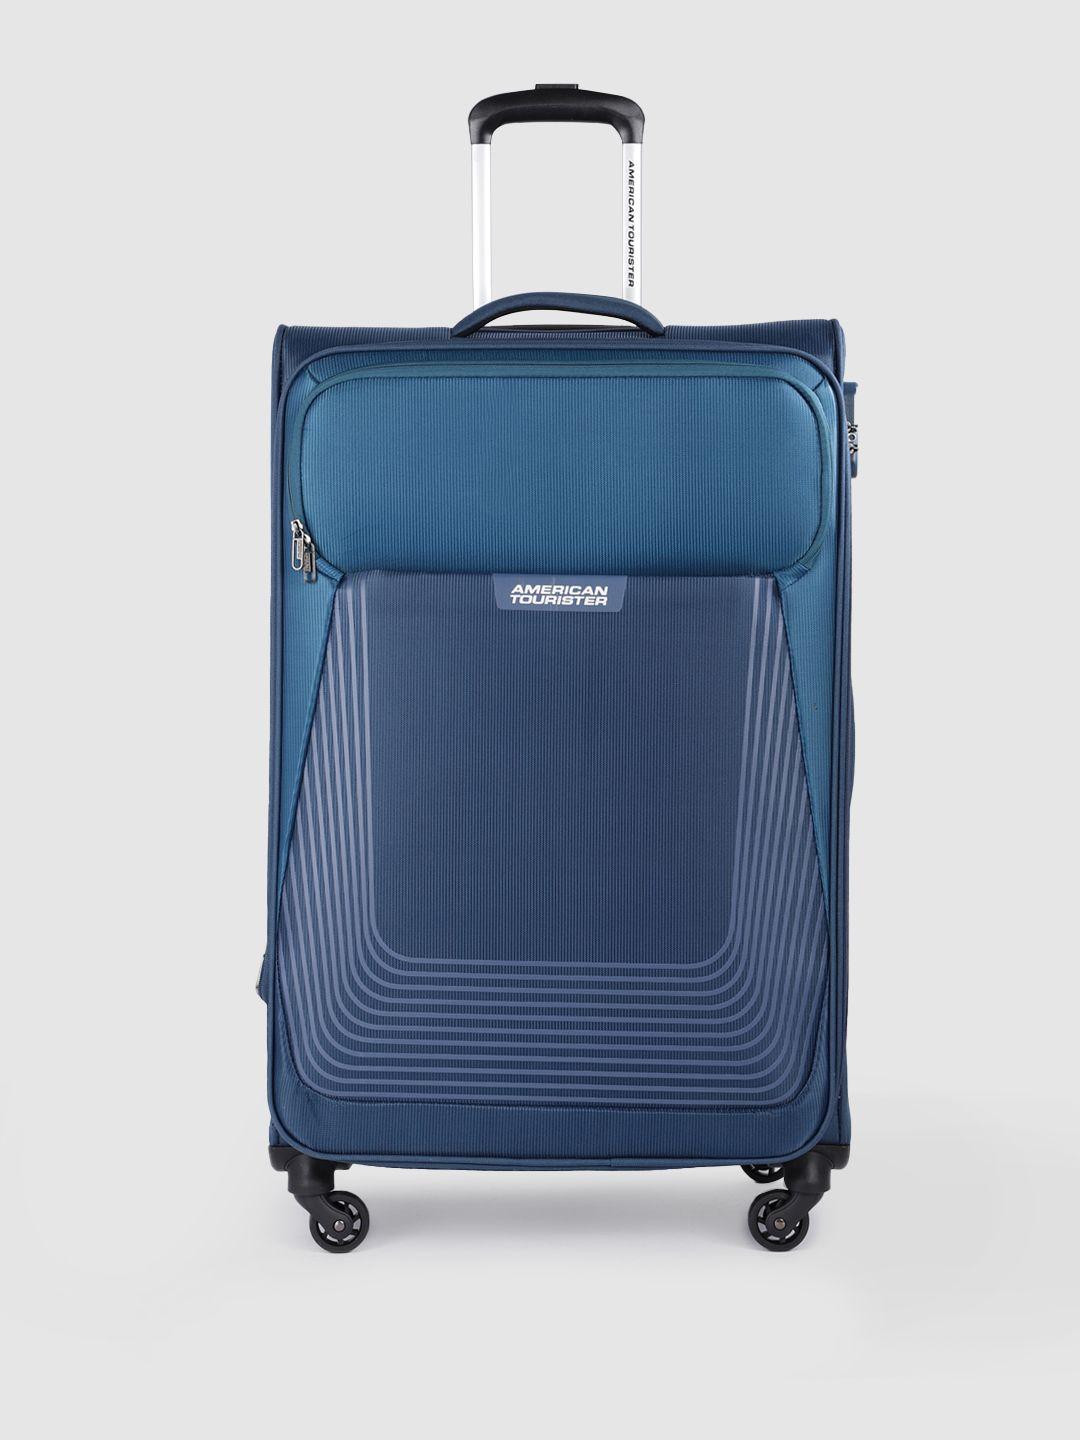 american tourister amt southside lite soft-sided large trolley suitcase